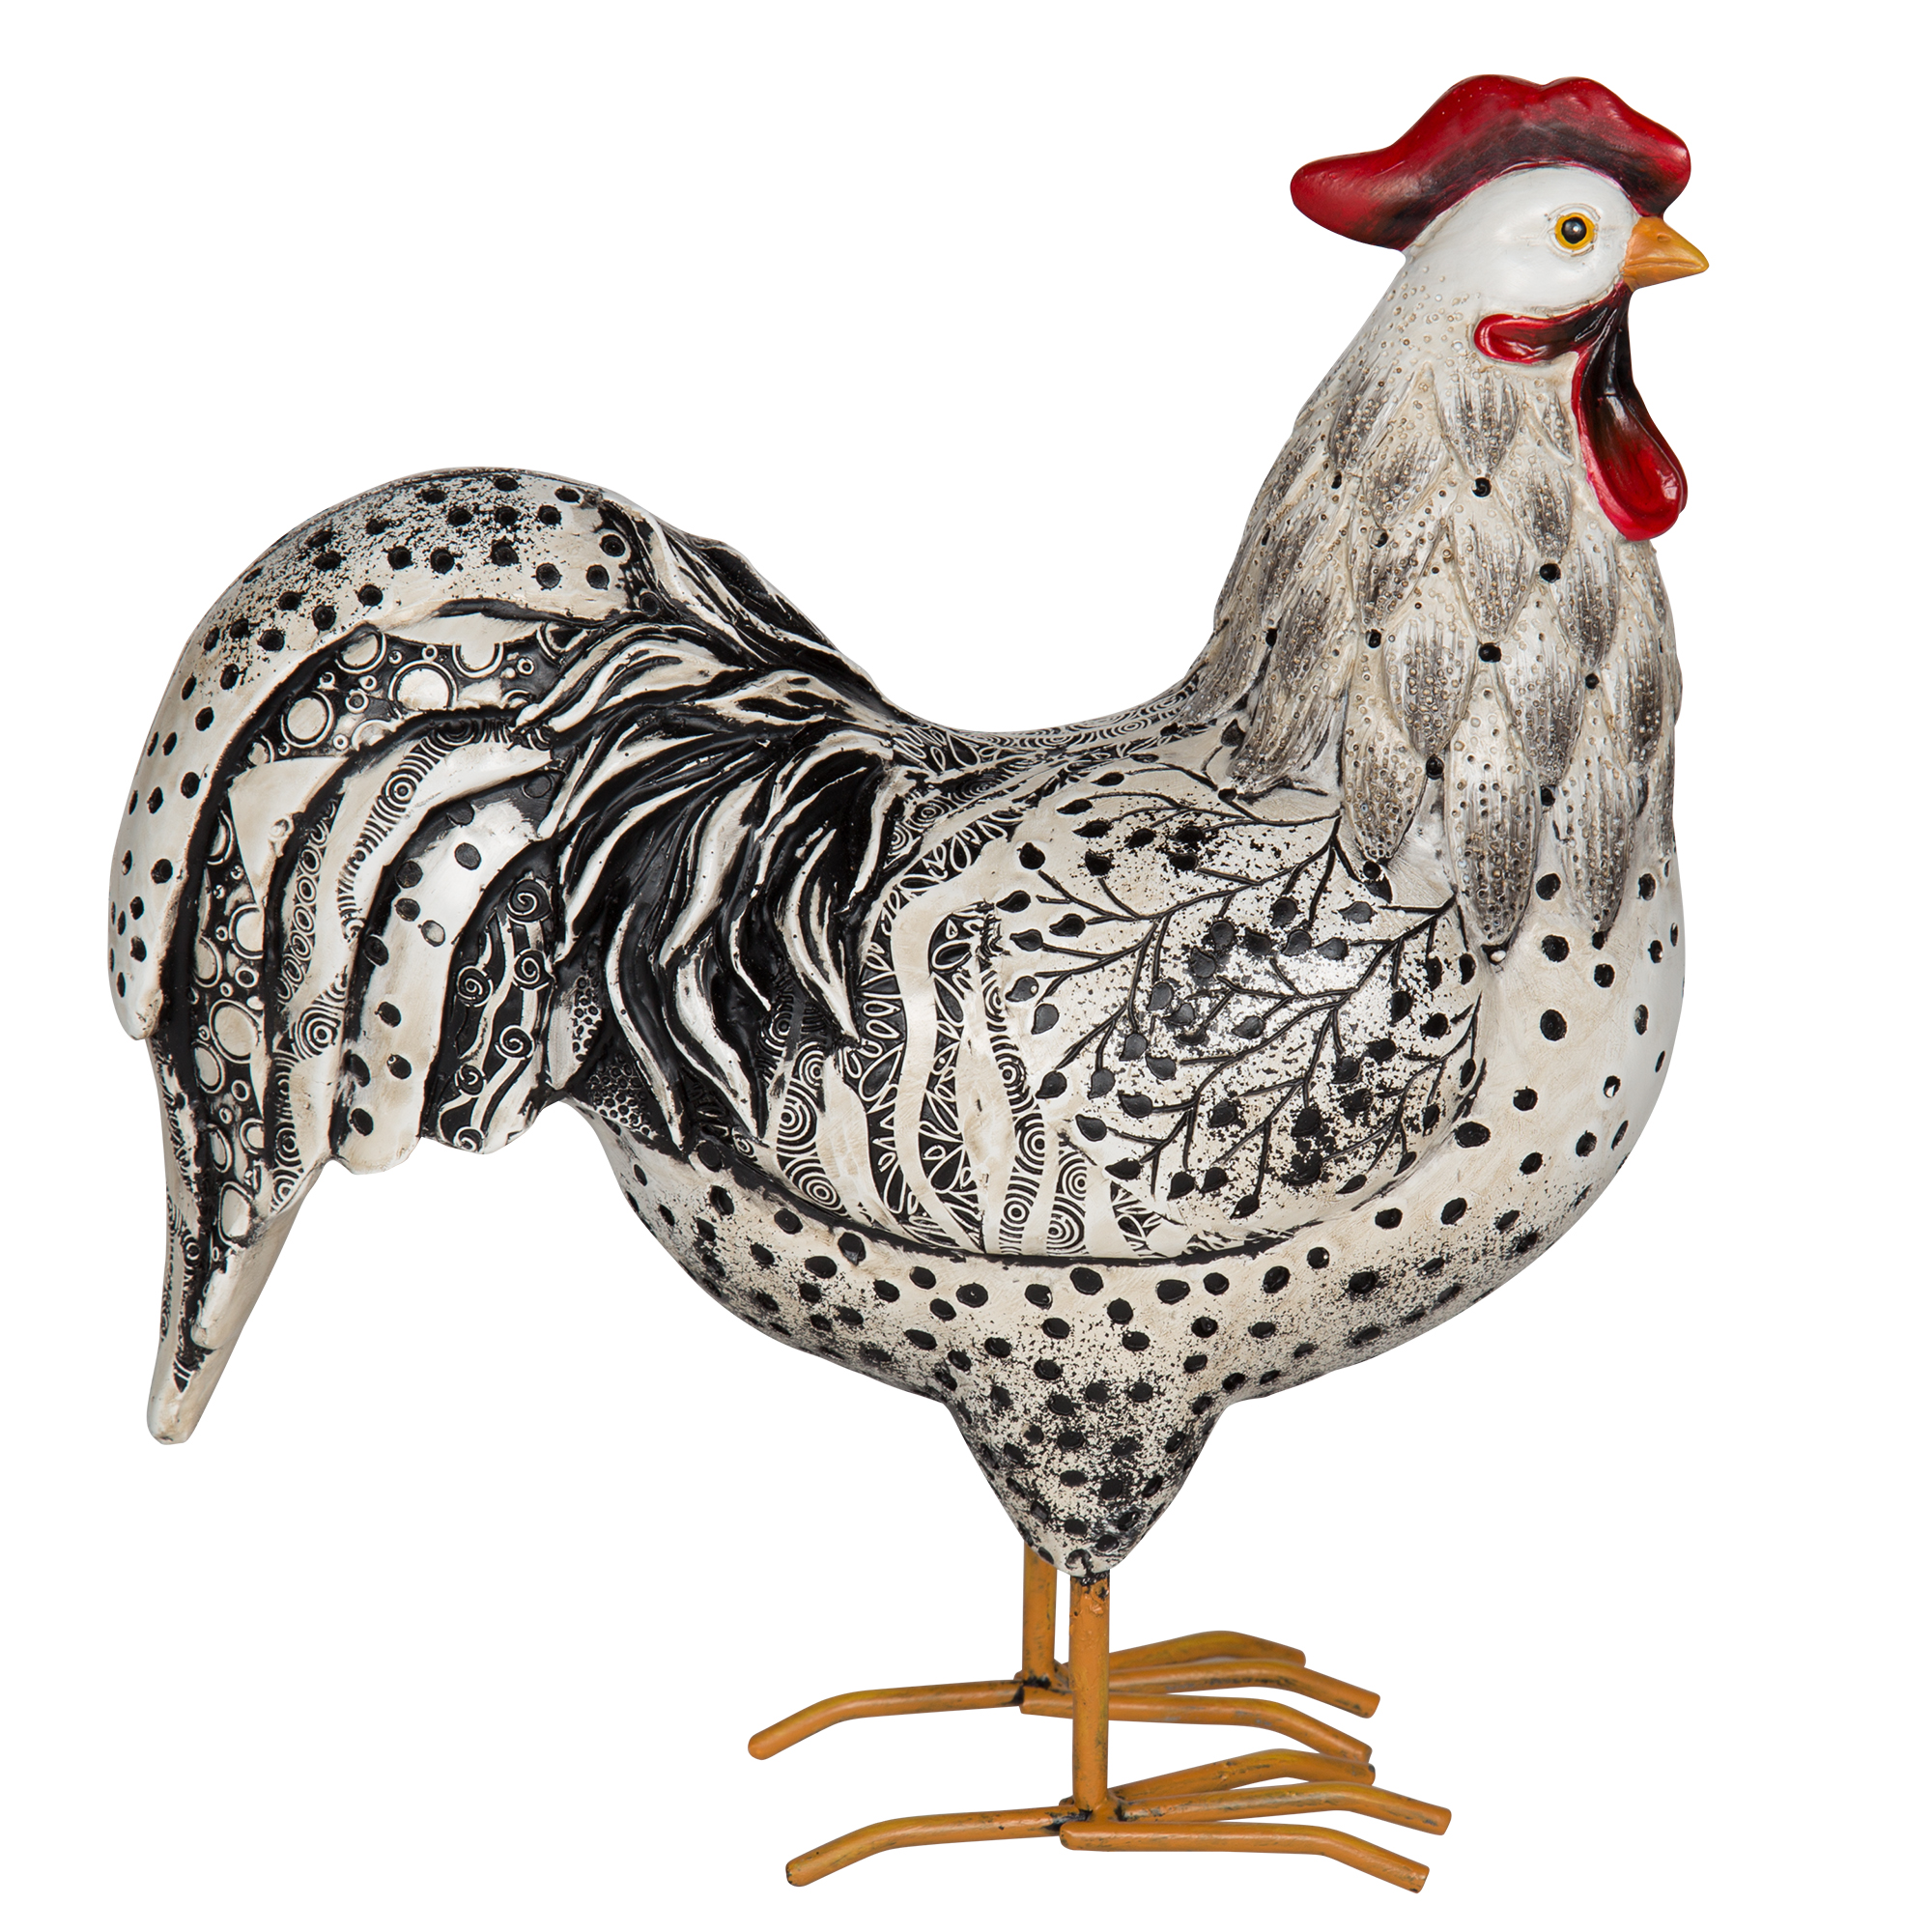 Better Homes & Gardens 9" Rustic Red & Gray Farmhouse Chicken Figurine - image 2 of 5